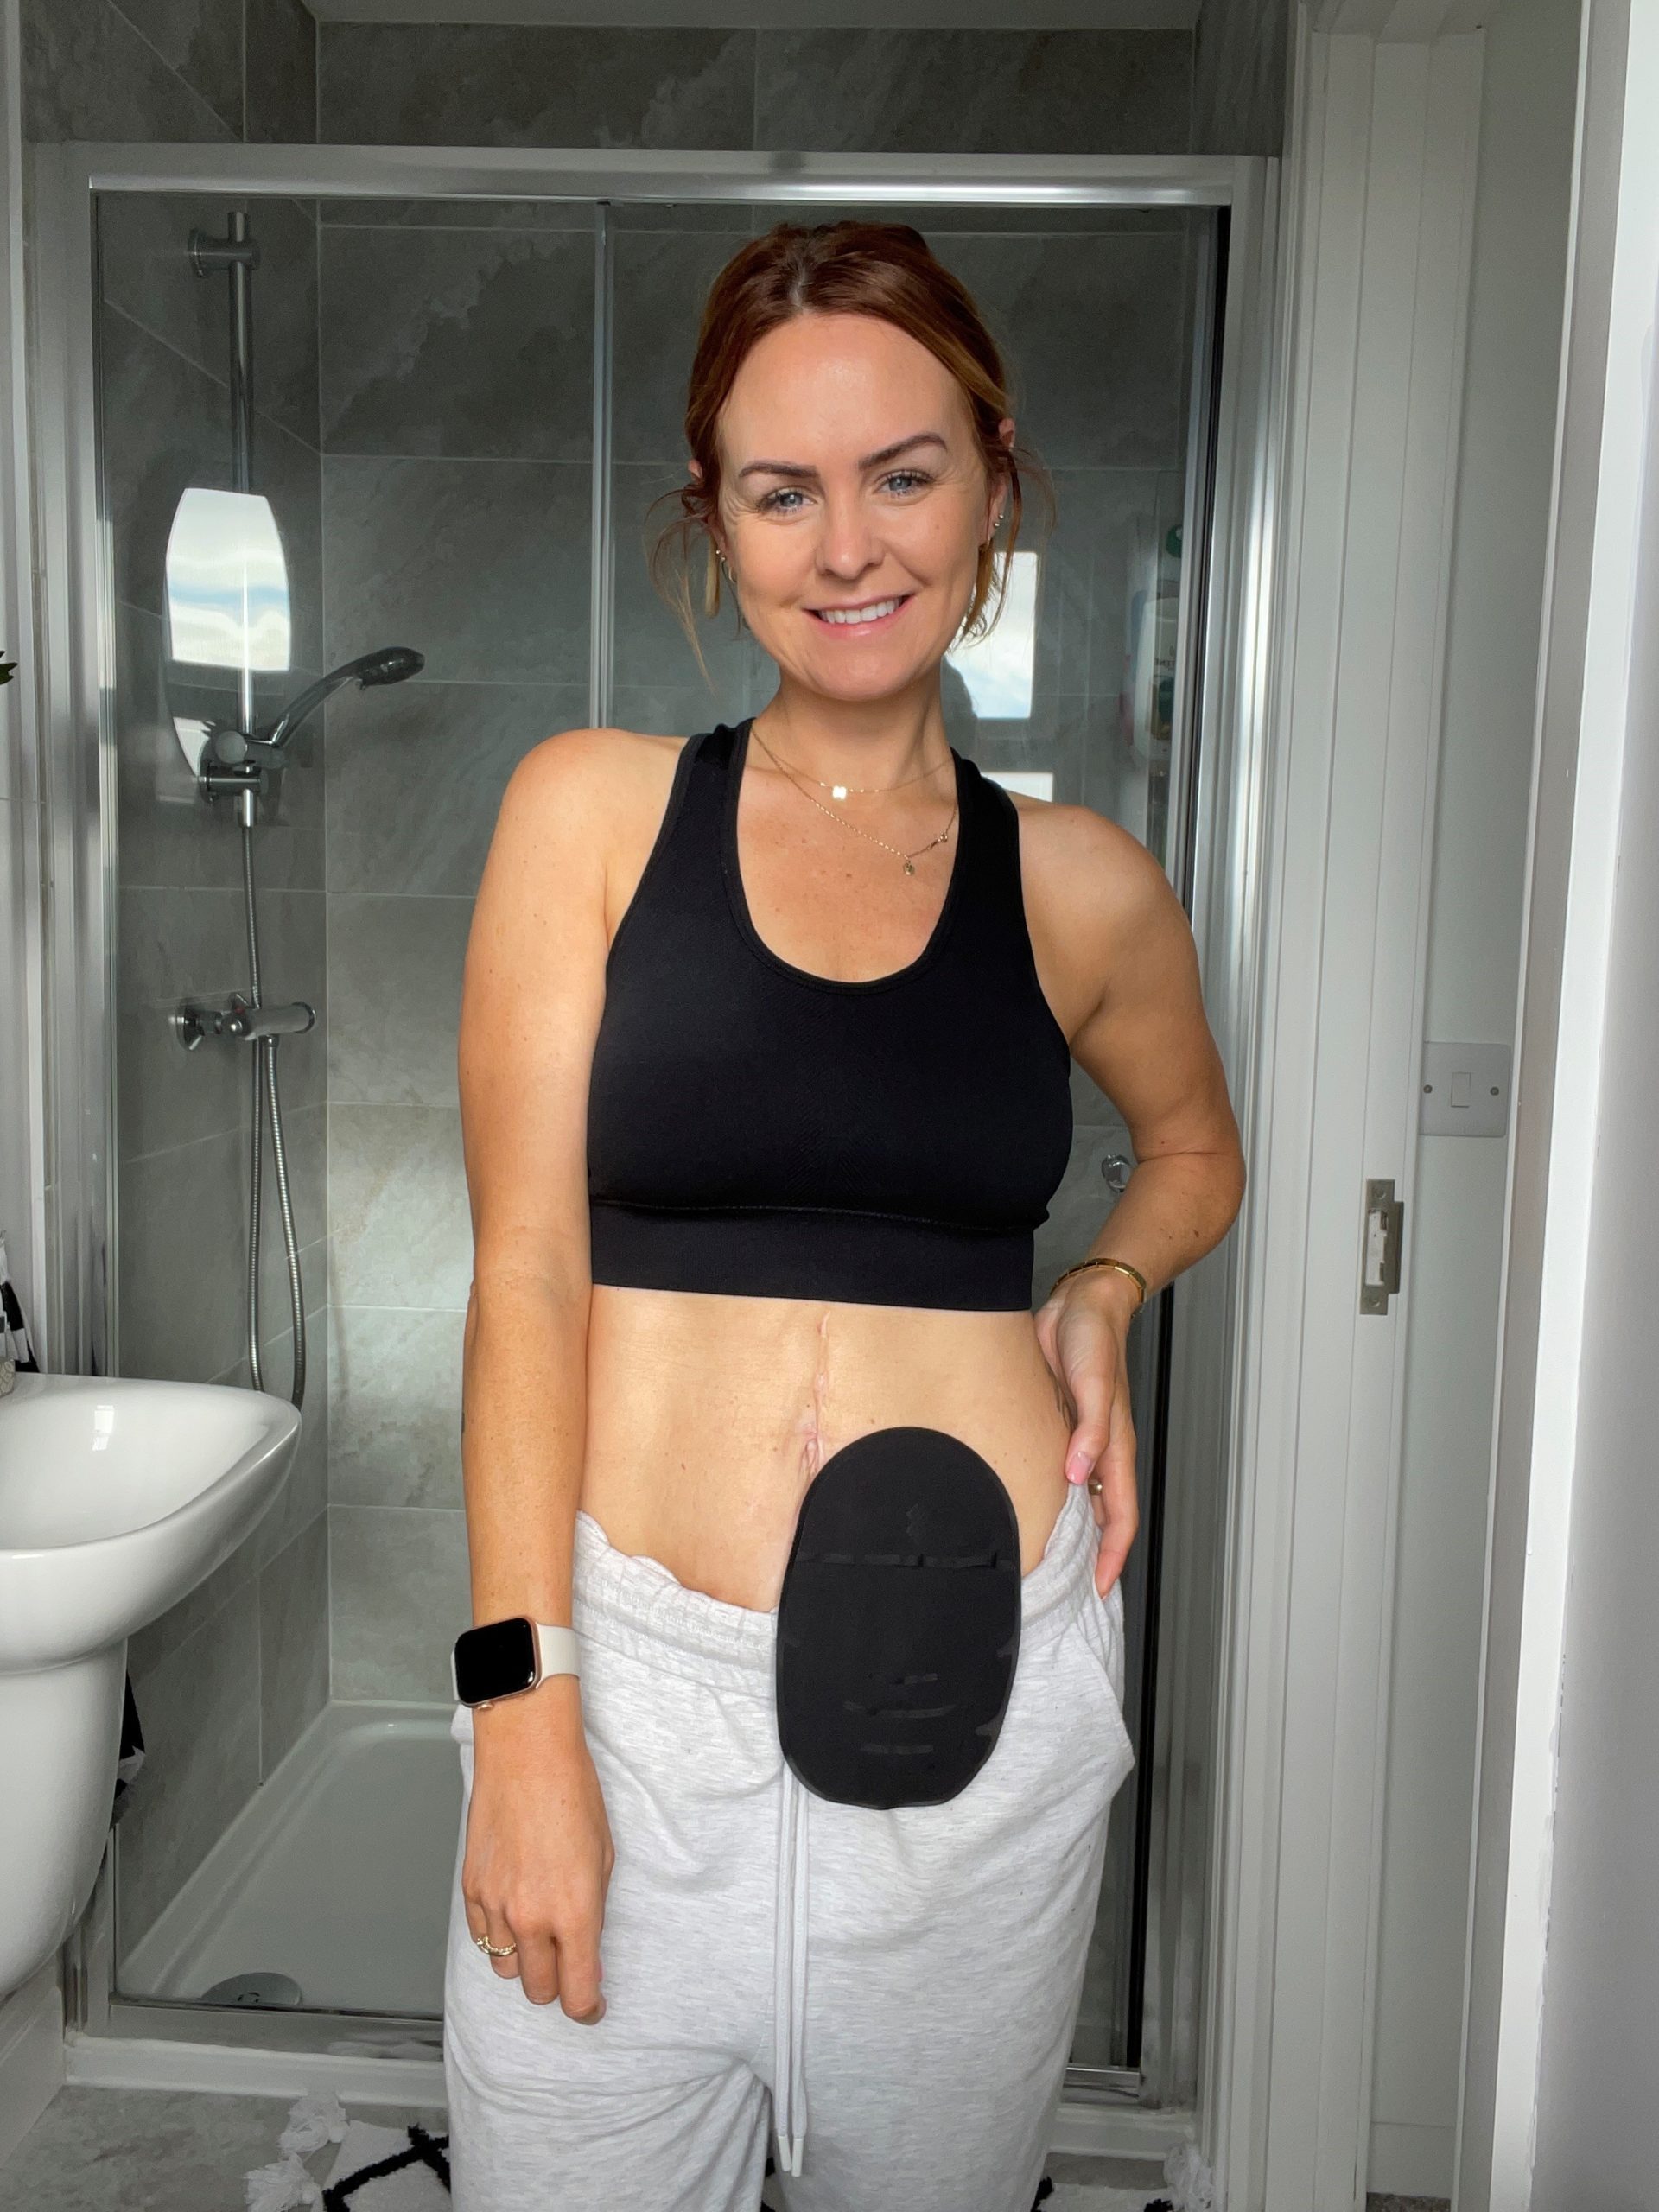 Importance of raising stoma awareness for World Ostomy Day by